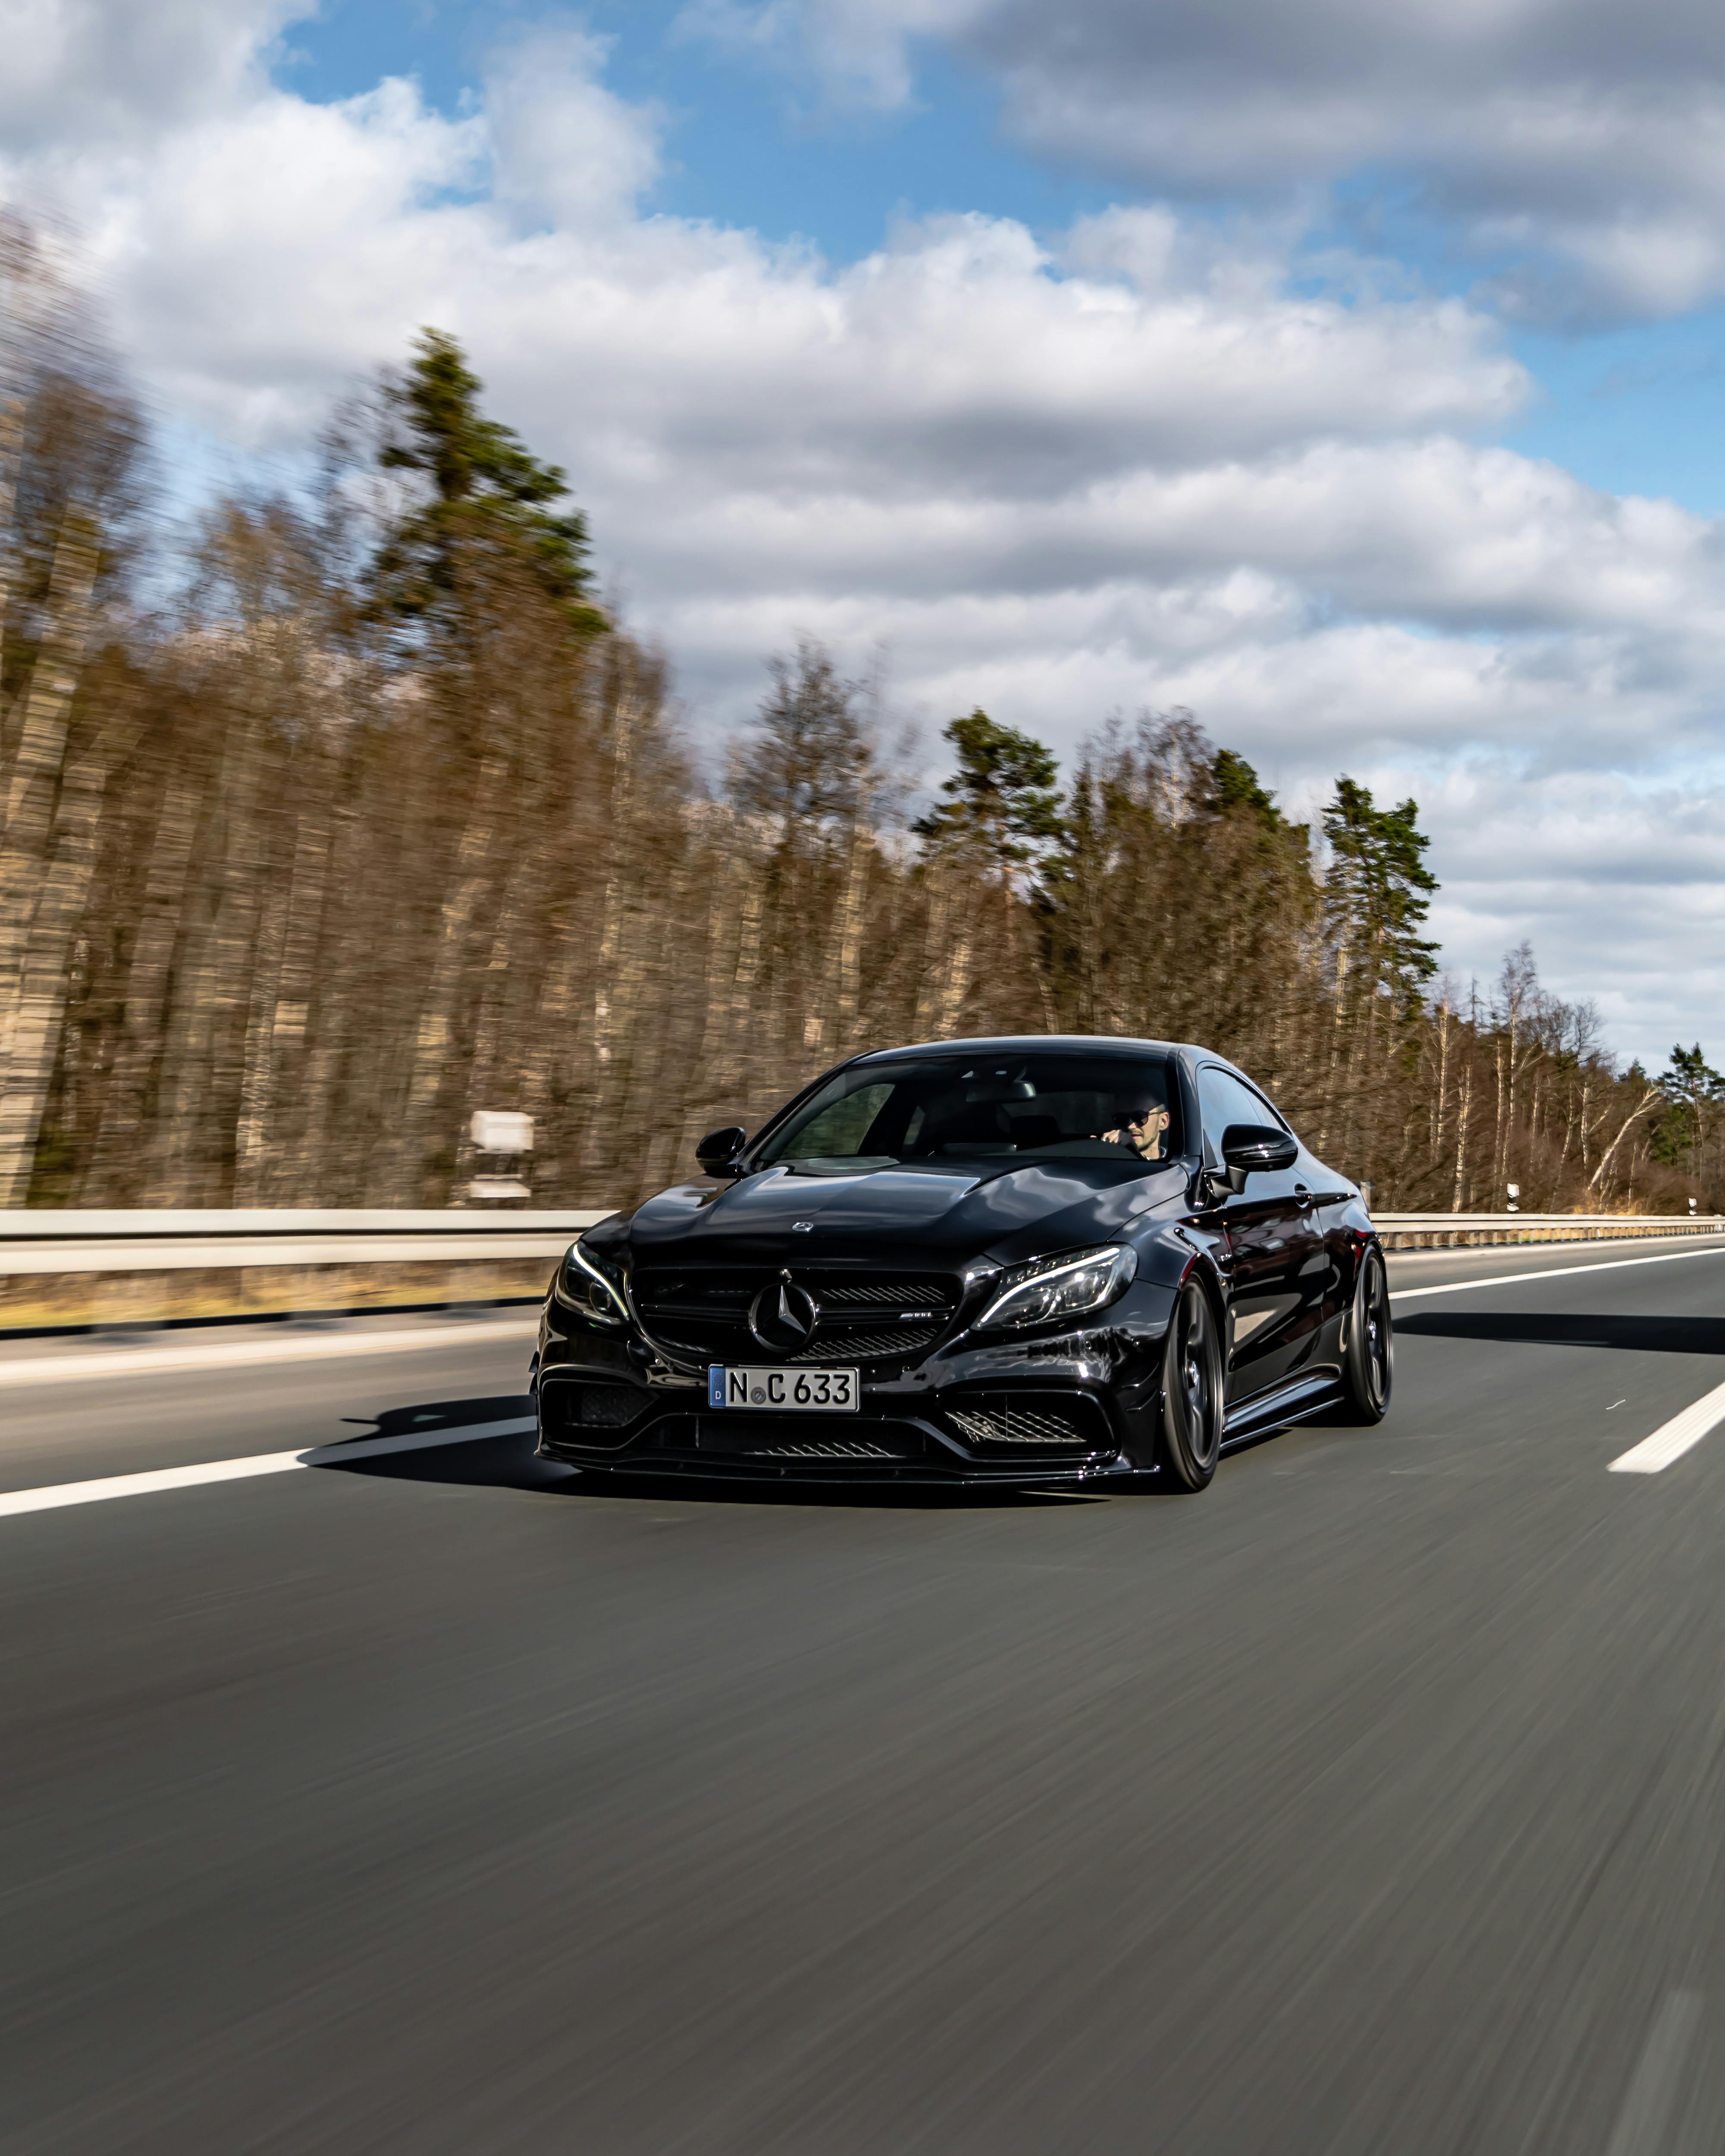 A Black Mercedes Benz C Class on a Road · Free Stock Photo